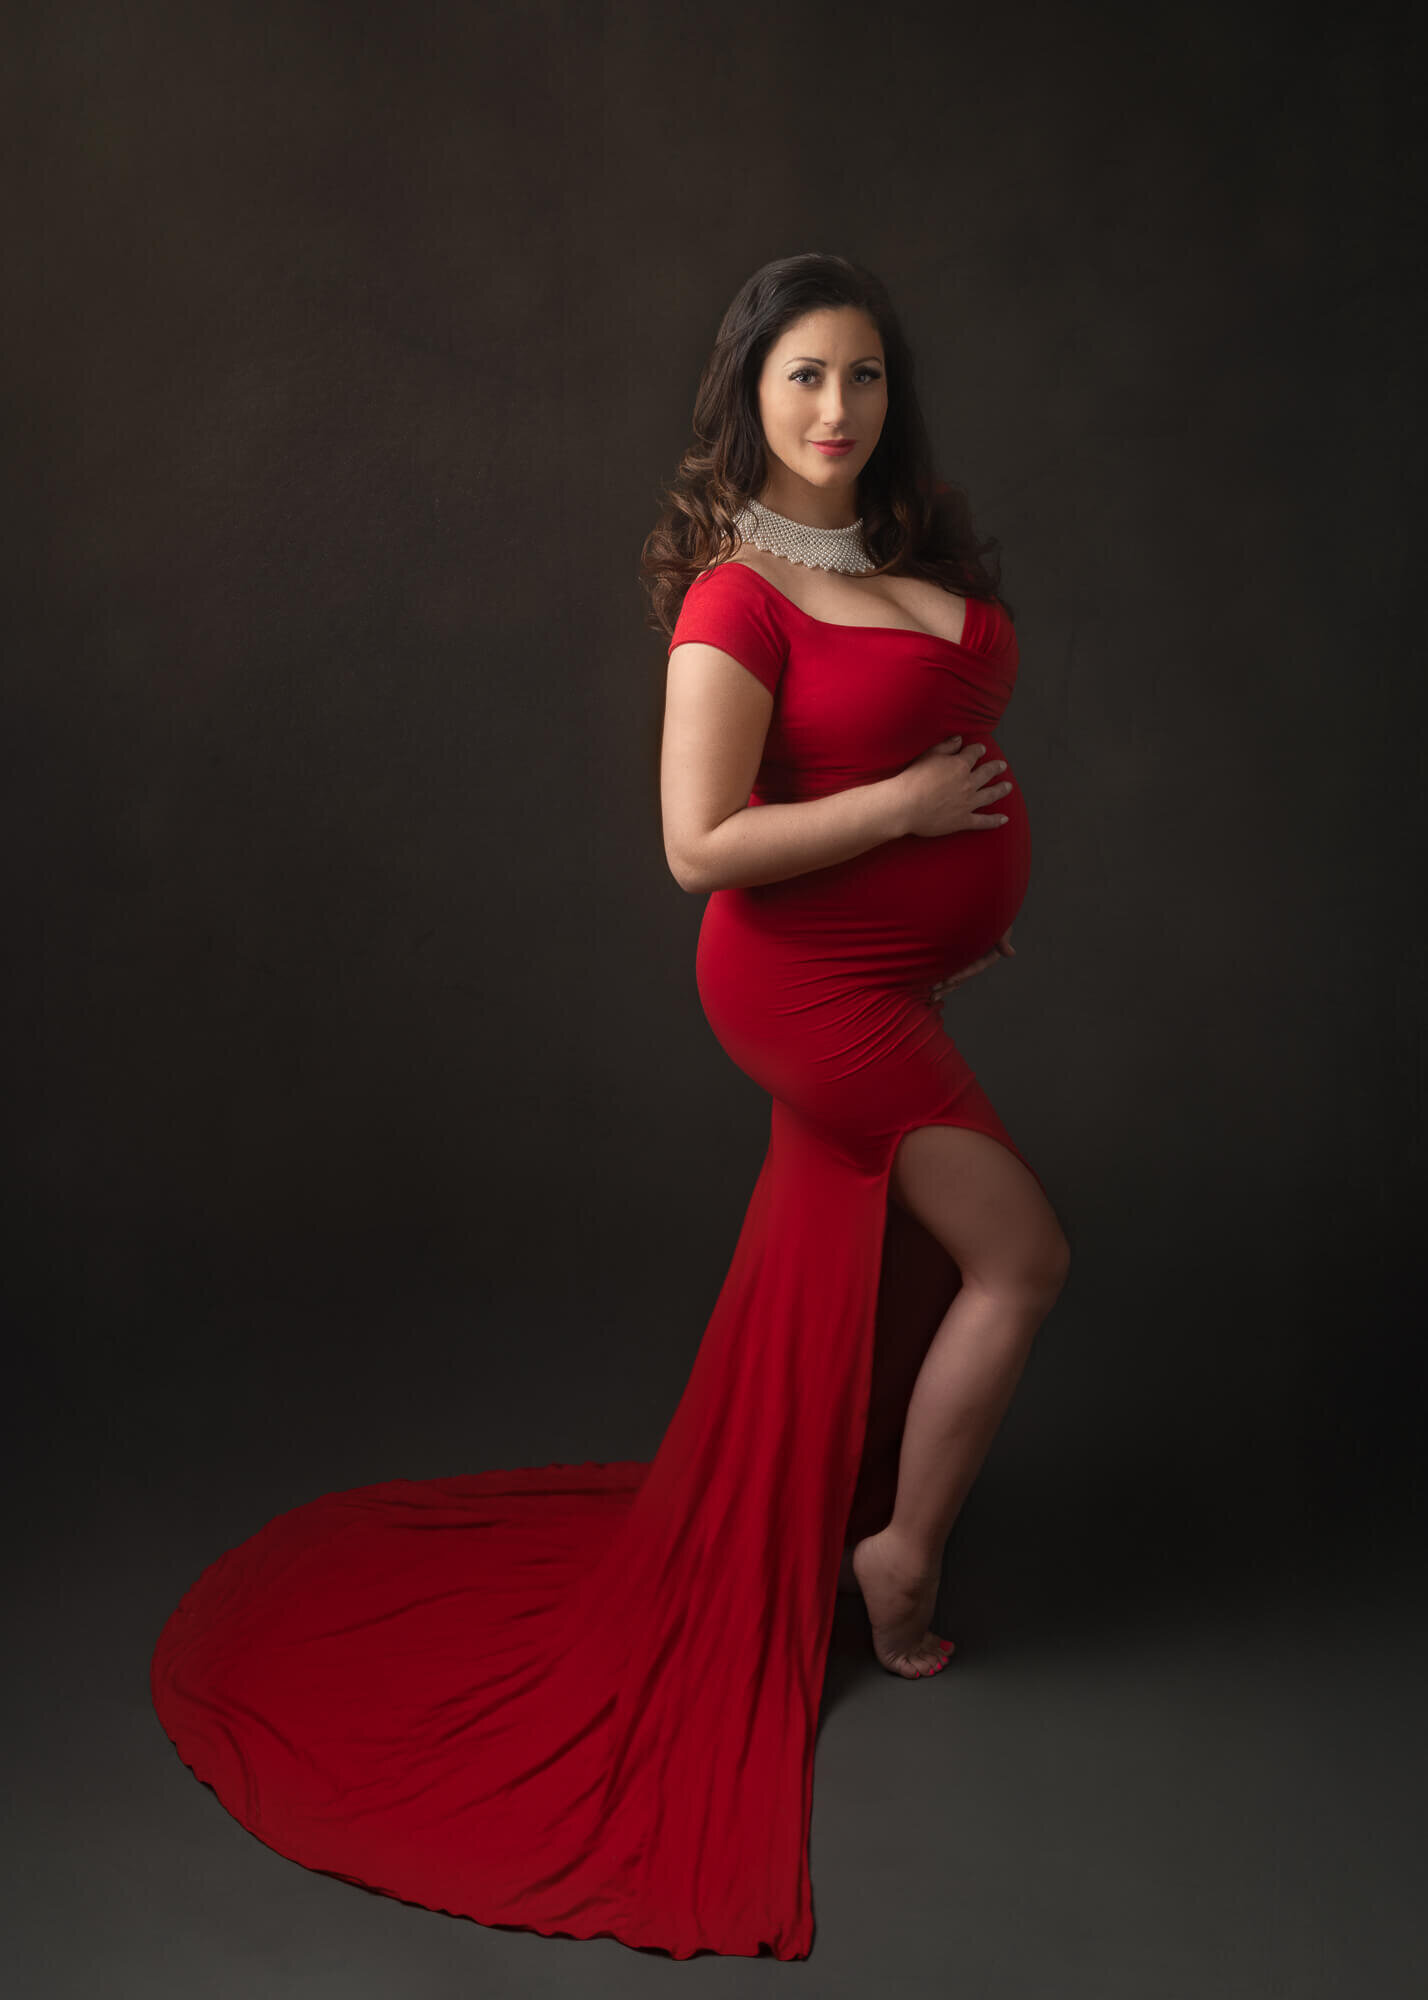 Fine-art maternity portrait of beautiful pregnant woman in red gown